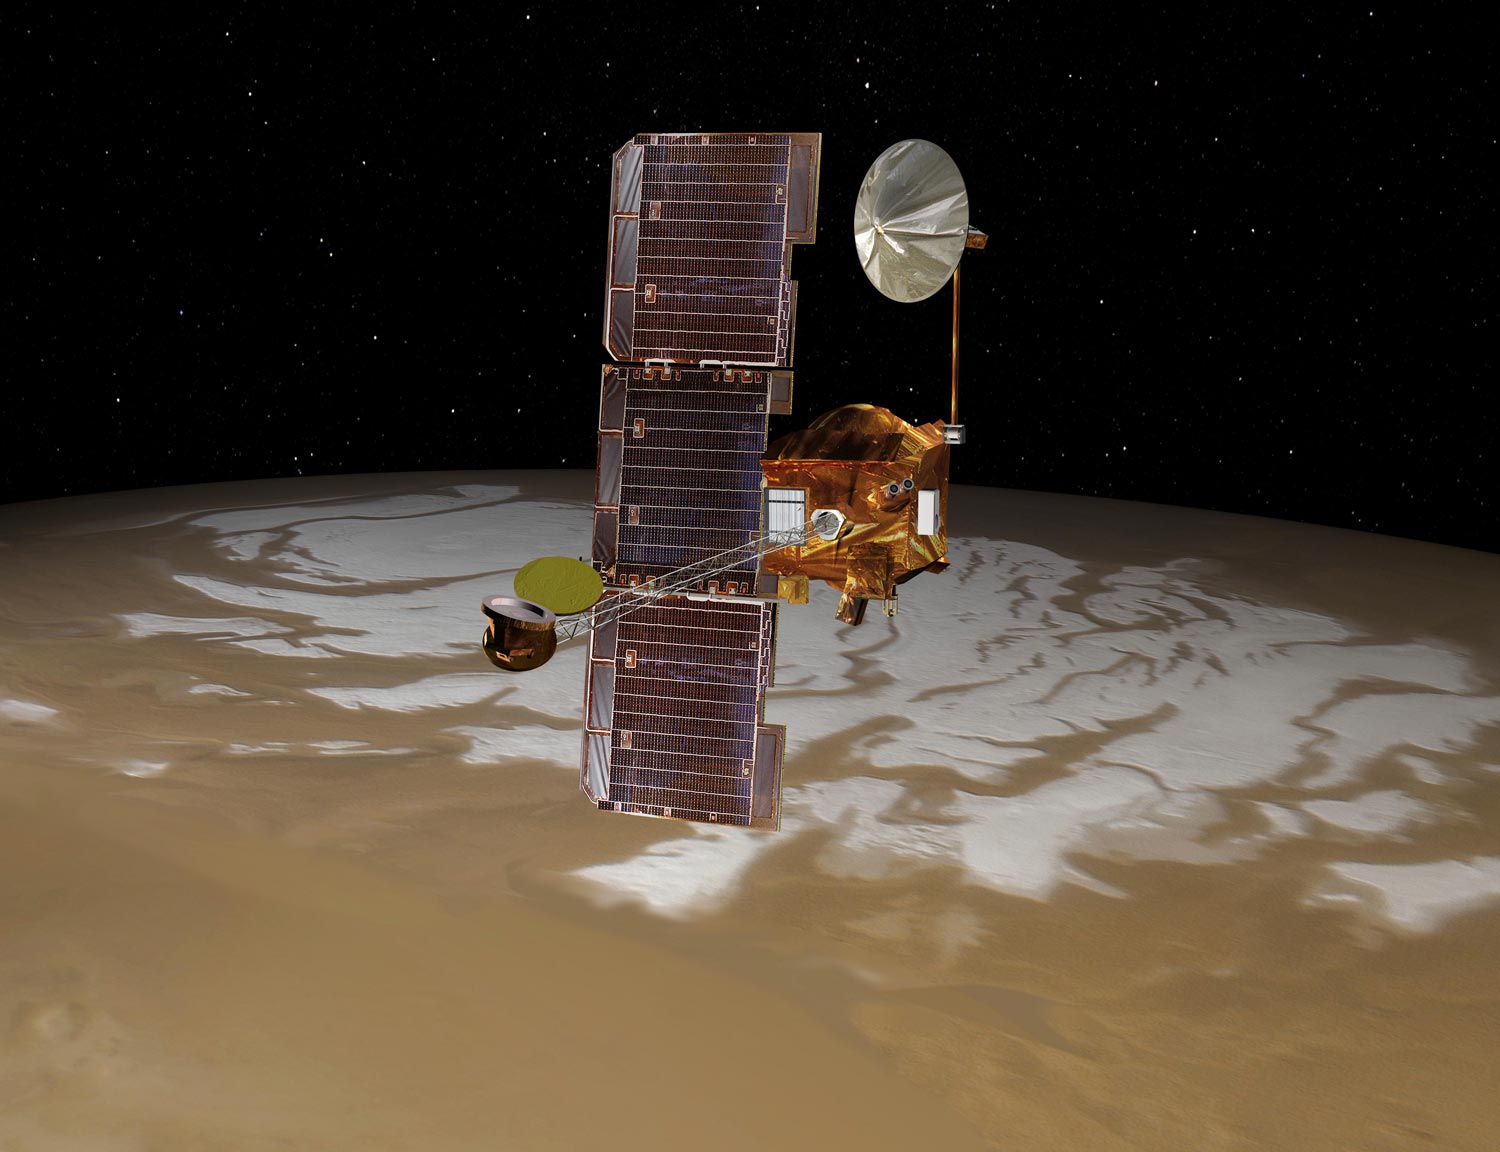 Odyssey Spacecraft Over Mars South Pole